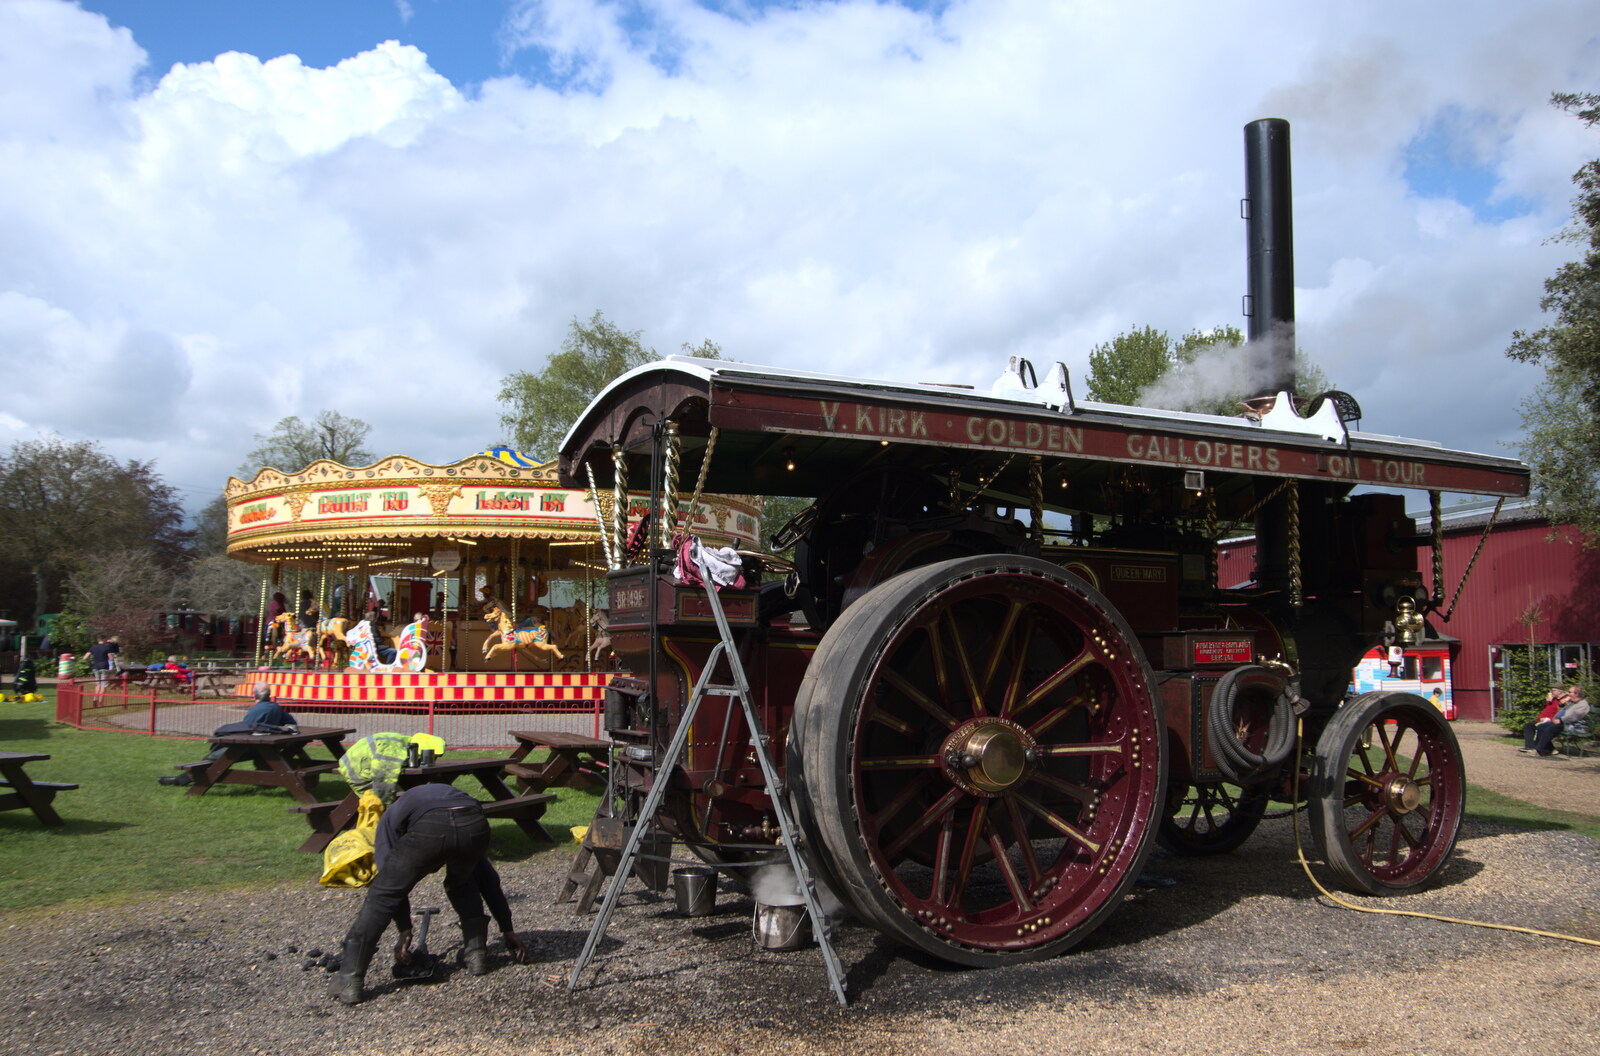 The enormous V. Kirk engine from The Heritage Steam Gala, Bressingham Steam Museum, Norfolk - 1st May 2023